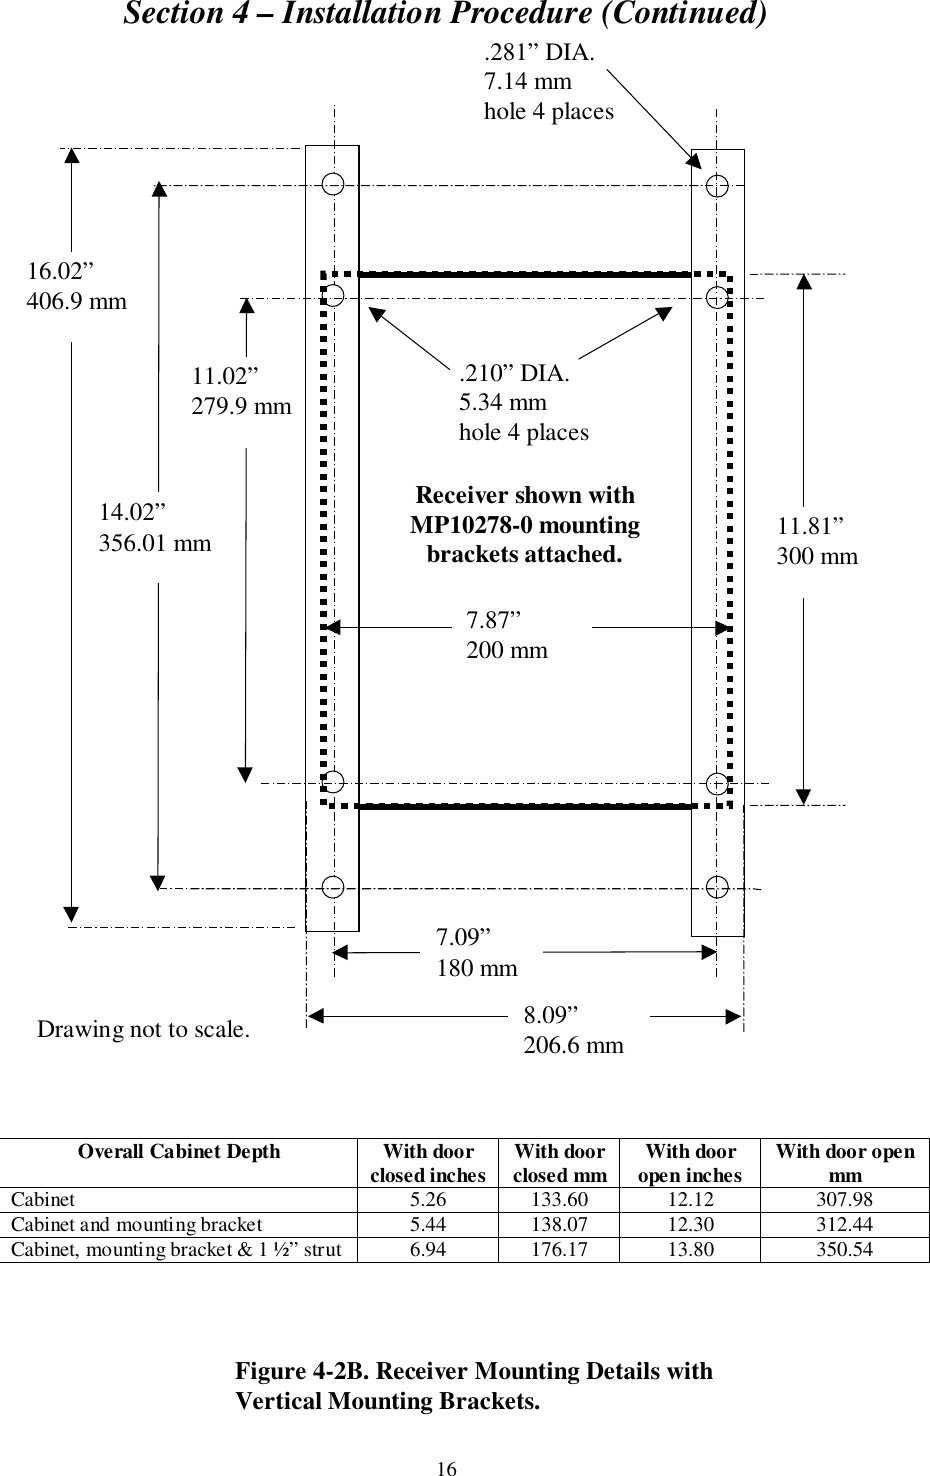 Section 4 – Installation Procedure (Continued)16Drawing not to scale.Figure 4-2B. Receiver Mounting Details withVertical Mounting Brackets..281” DIA.7.14 mmhole 4 placesReceiver shown withMP10278-0 mountingbrackets attached..210” DIA.5.34 mmhole 4 places16.02”406.9 mm7.09”180 mm11.02”279.9 mm14.02”356.01 mm8.09”206.6 mm11.81”300 mm7.87”200 mmOverall Cabinet Depth With doorclosed inches With doorclosed mm With dooropen inches With door openmmCabinet 5.26 133.60 12.12 307.98Cabinet and mounting bracket 5.44 138.07 12.30 312.44Cabinet, mounting bracket &amp; 1 ½” strut 6.94 176.17 13.80 350.54